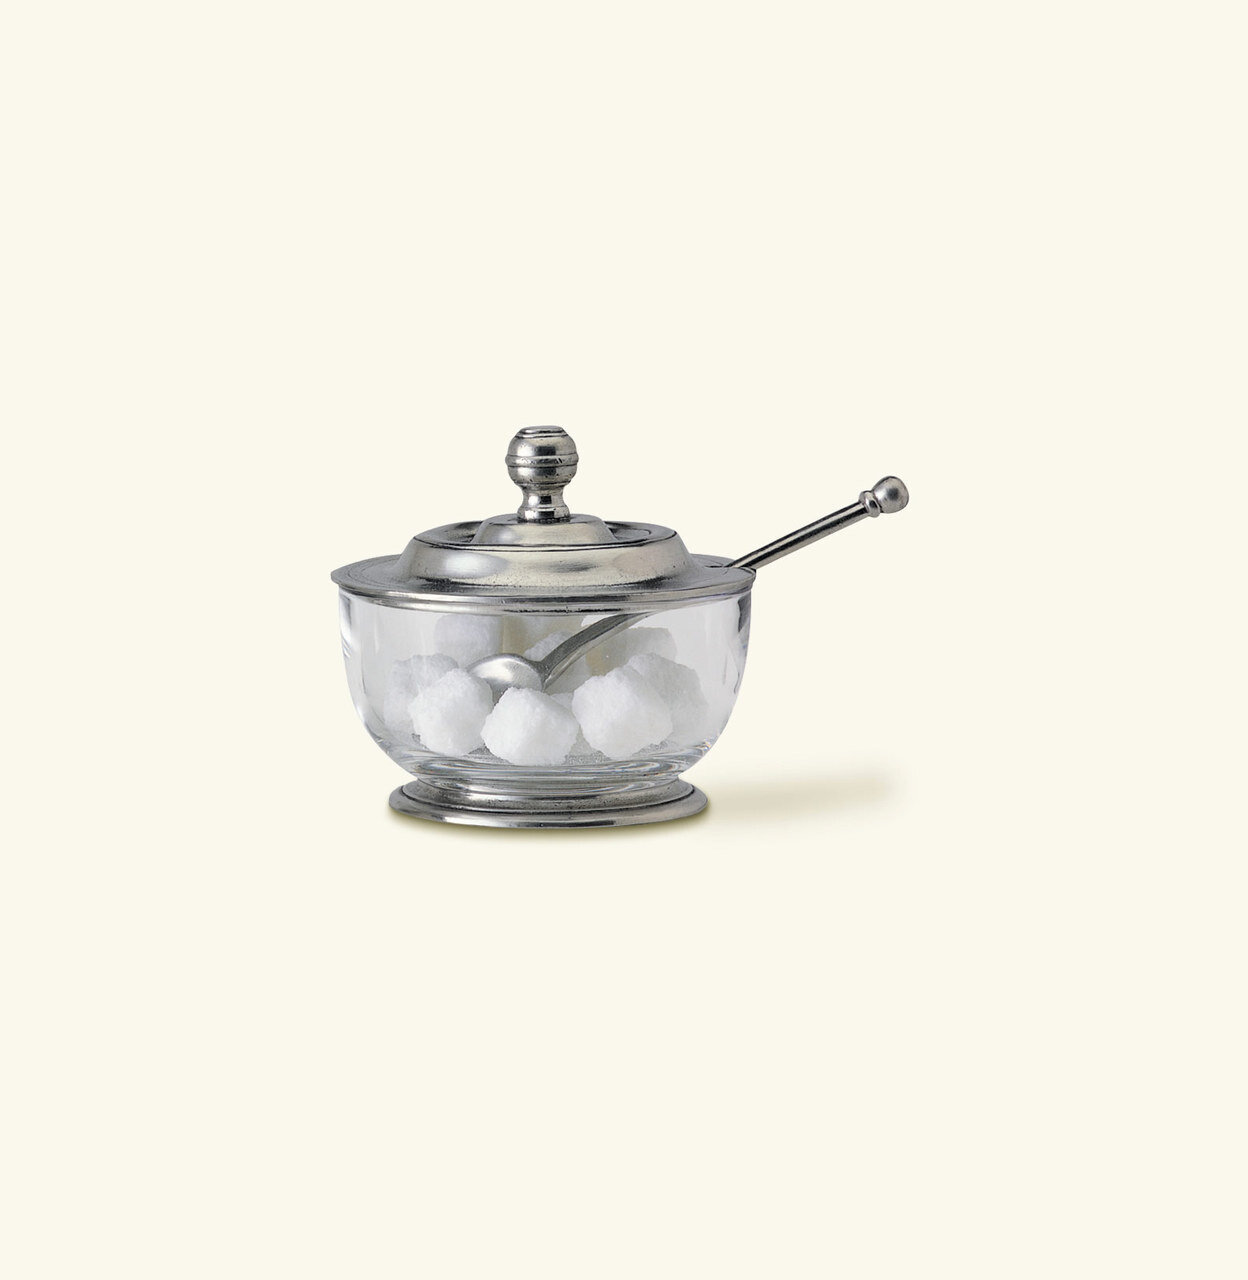 Match Pewter Sugar Bowl With Spoon 956